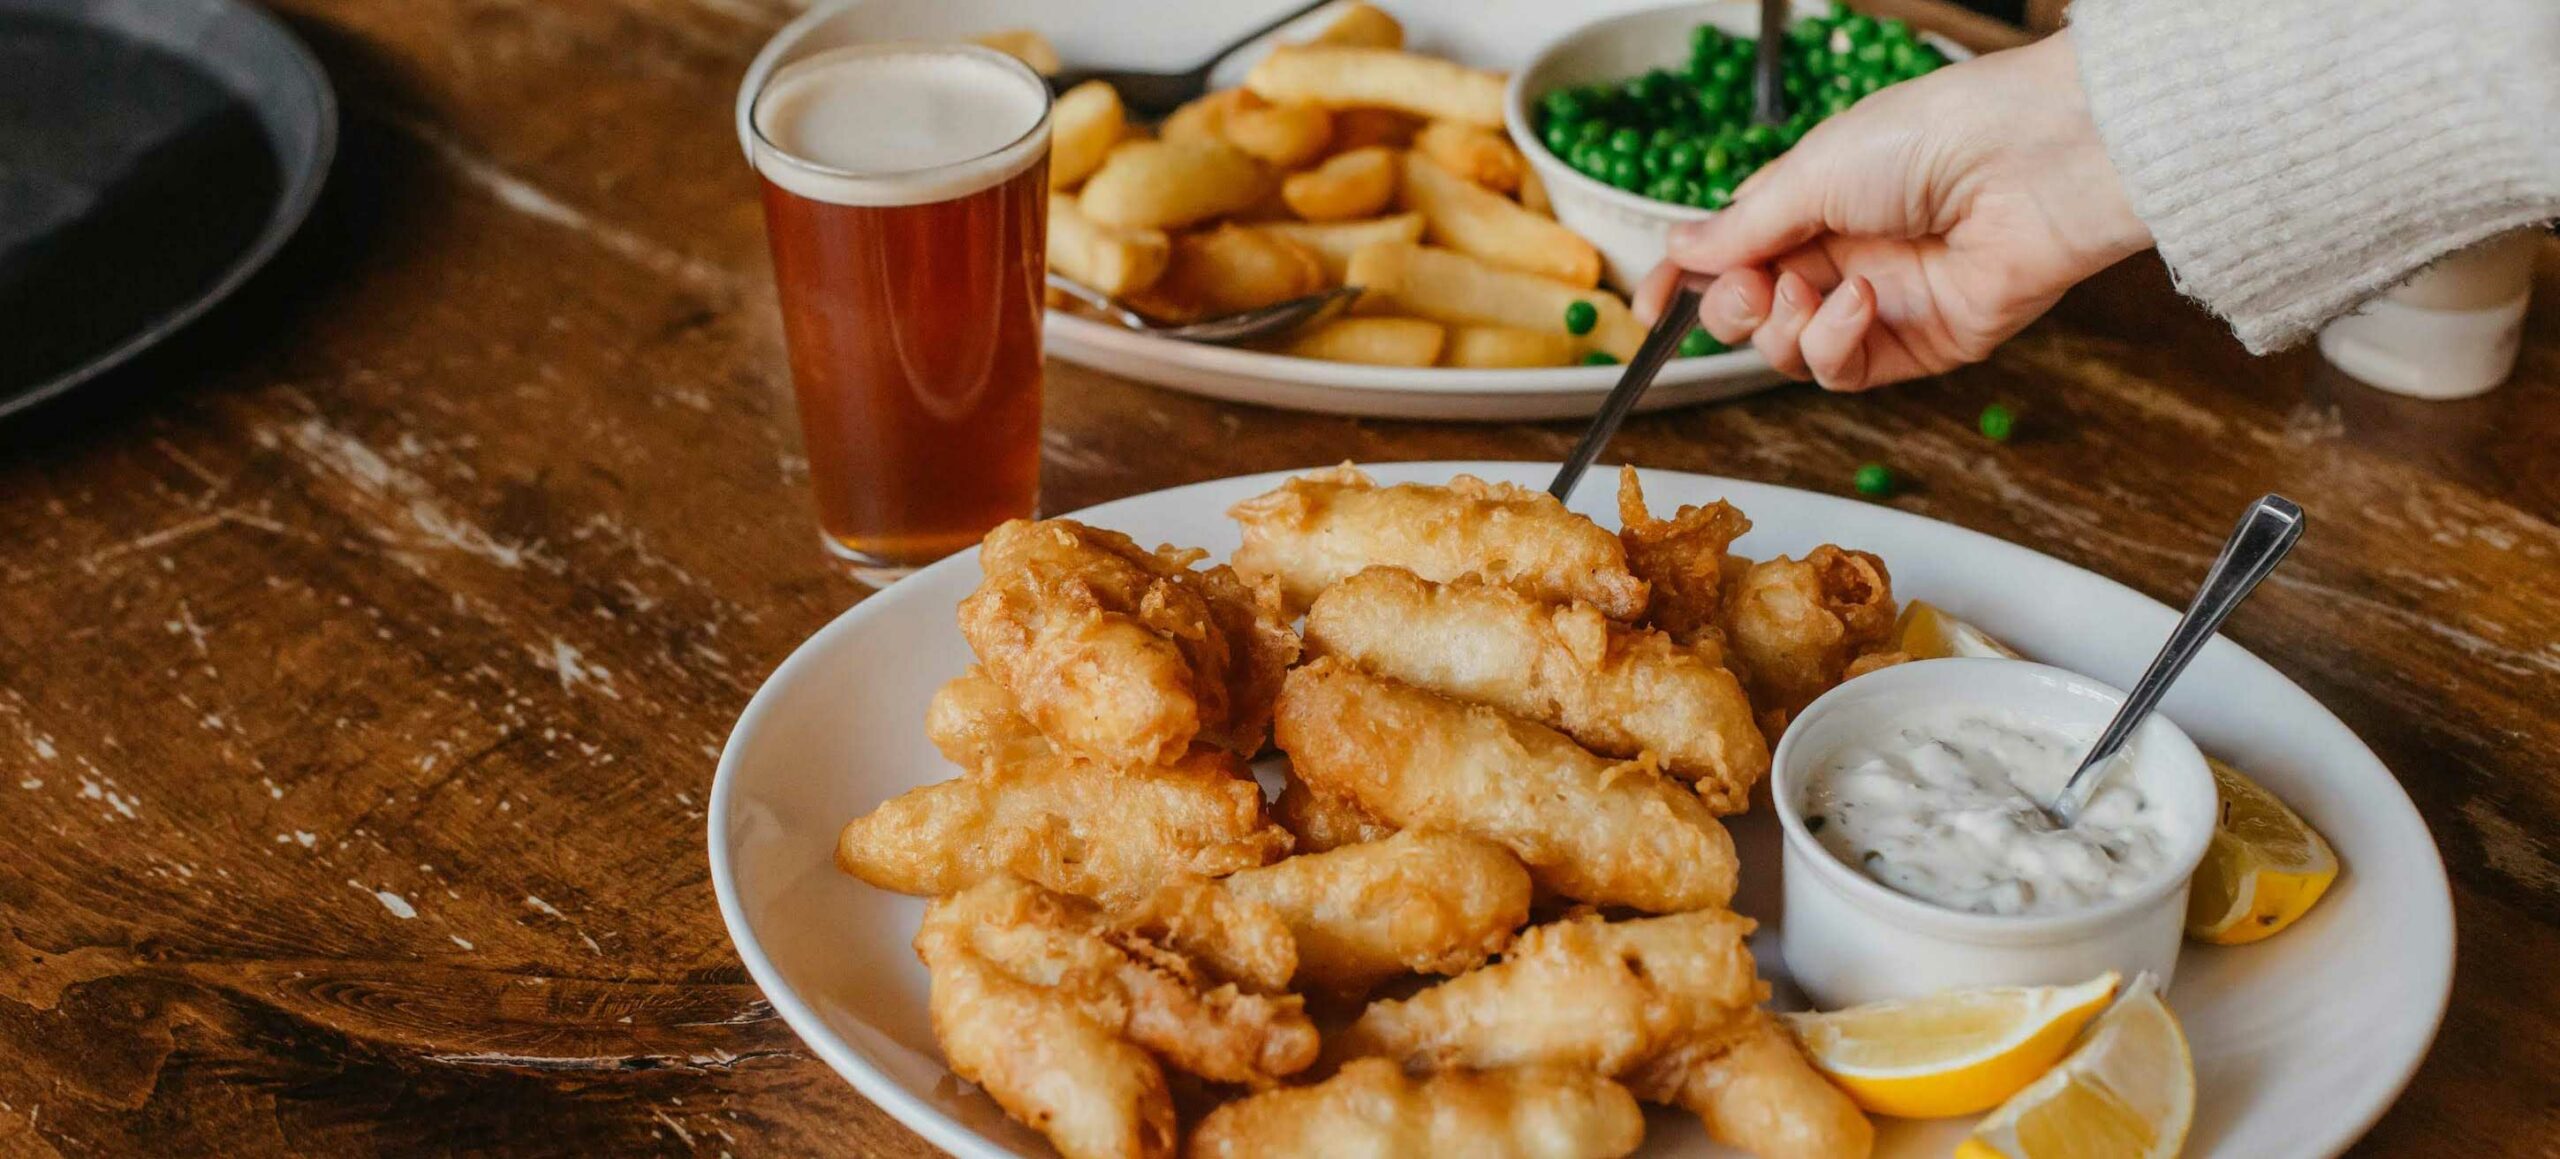 Plate of fish and chips with beer glass